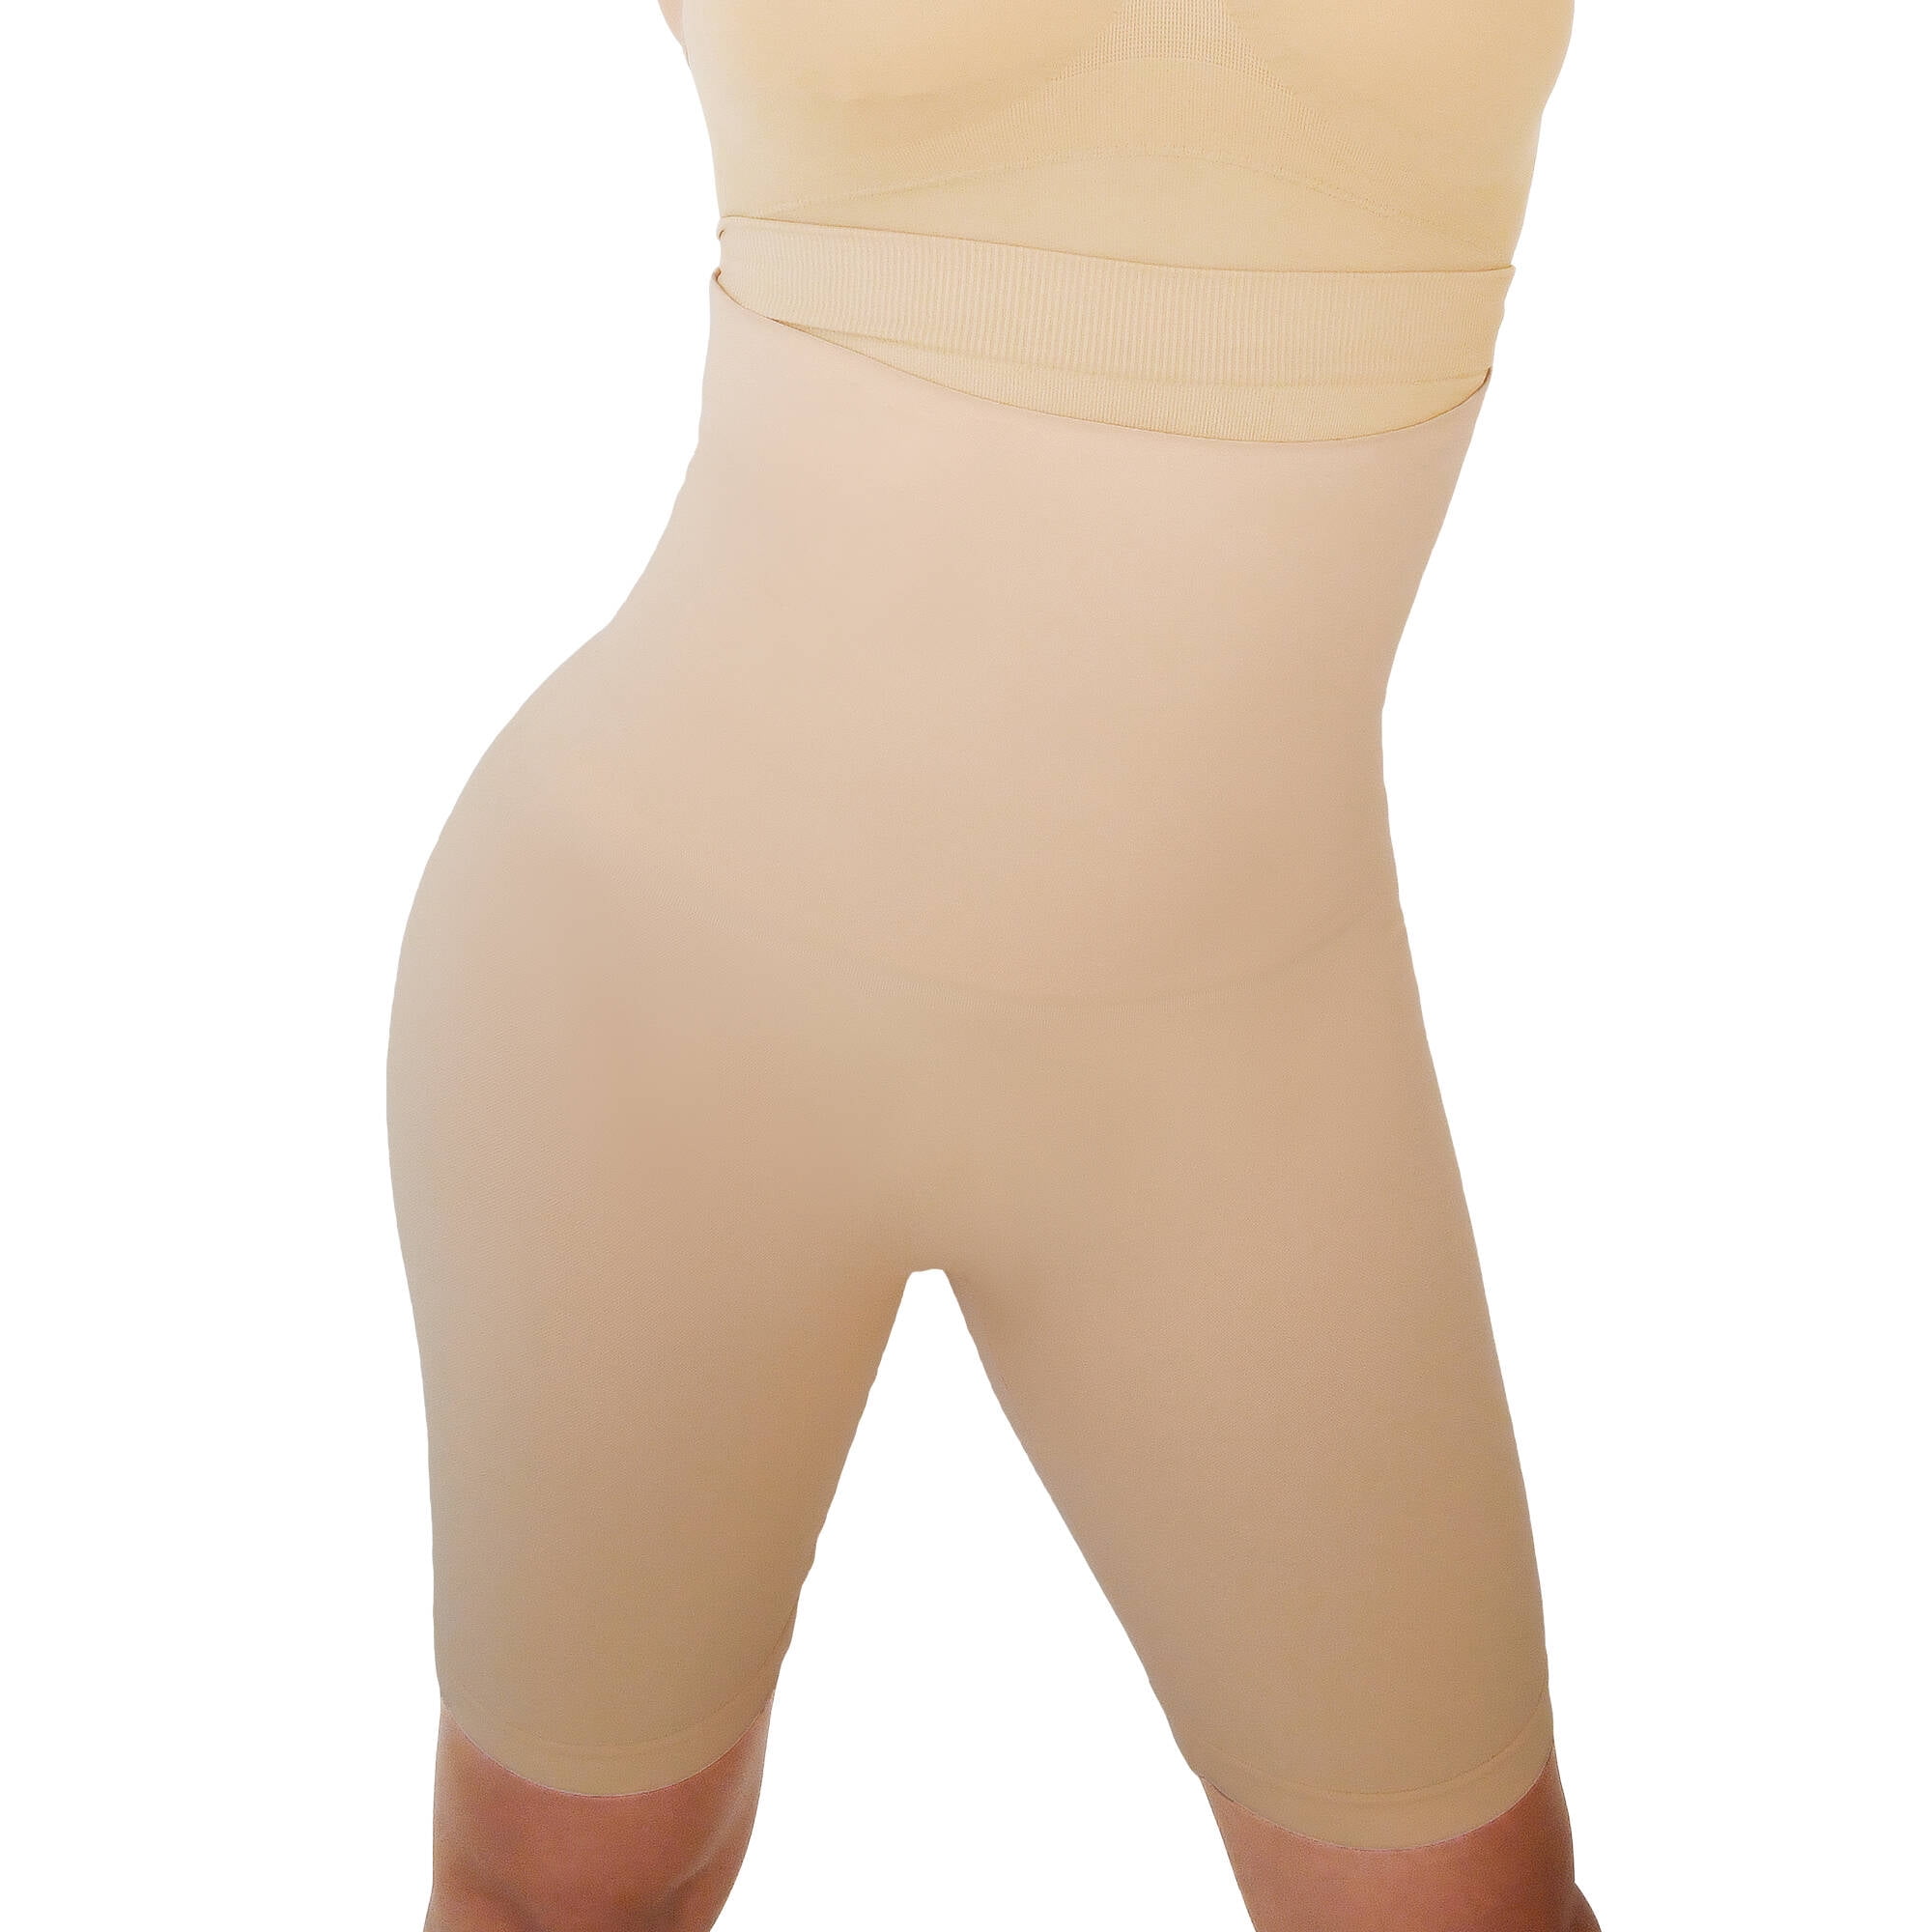 TrueShapers 1270 Mid-Thigh Invisible Control Support Short